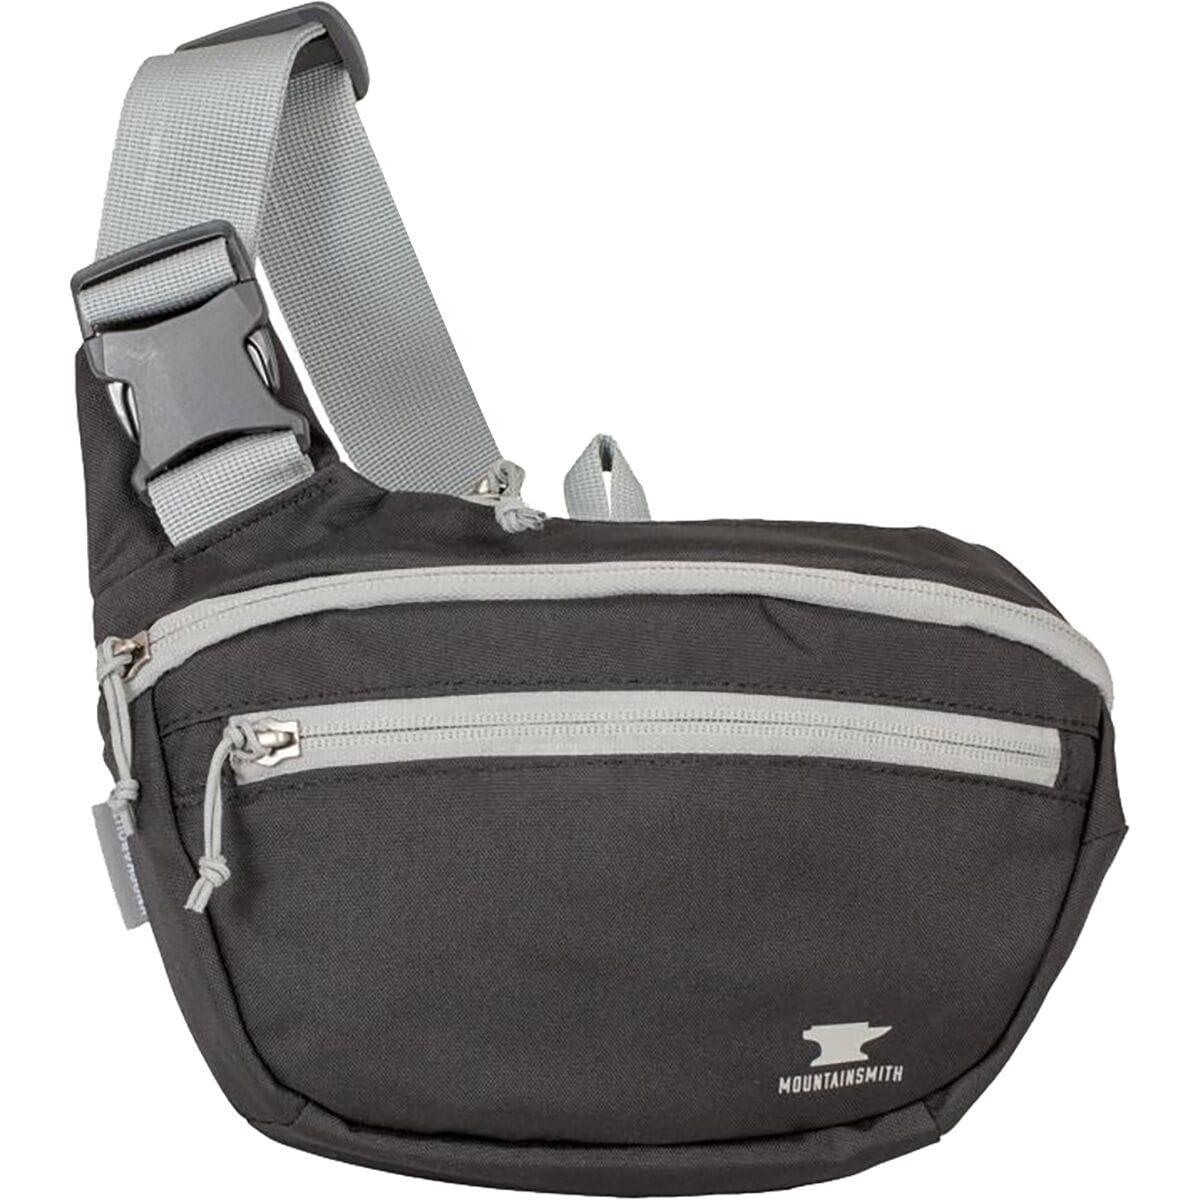 Photos - Backpack Mountainsmith Knockabout 4L Sling Bag 